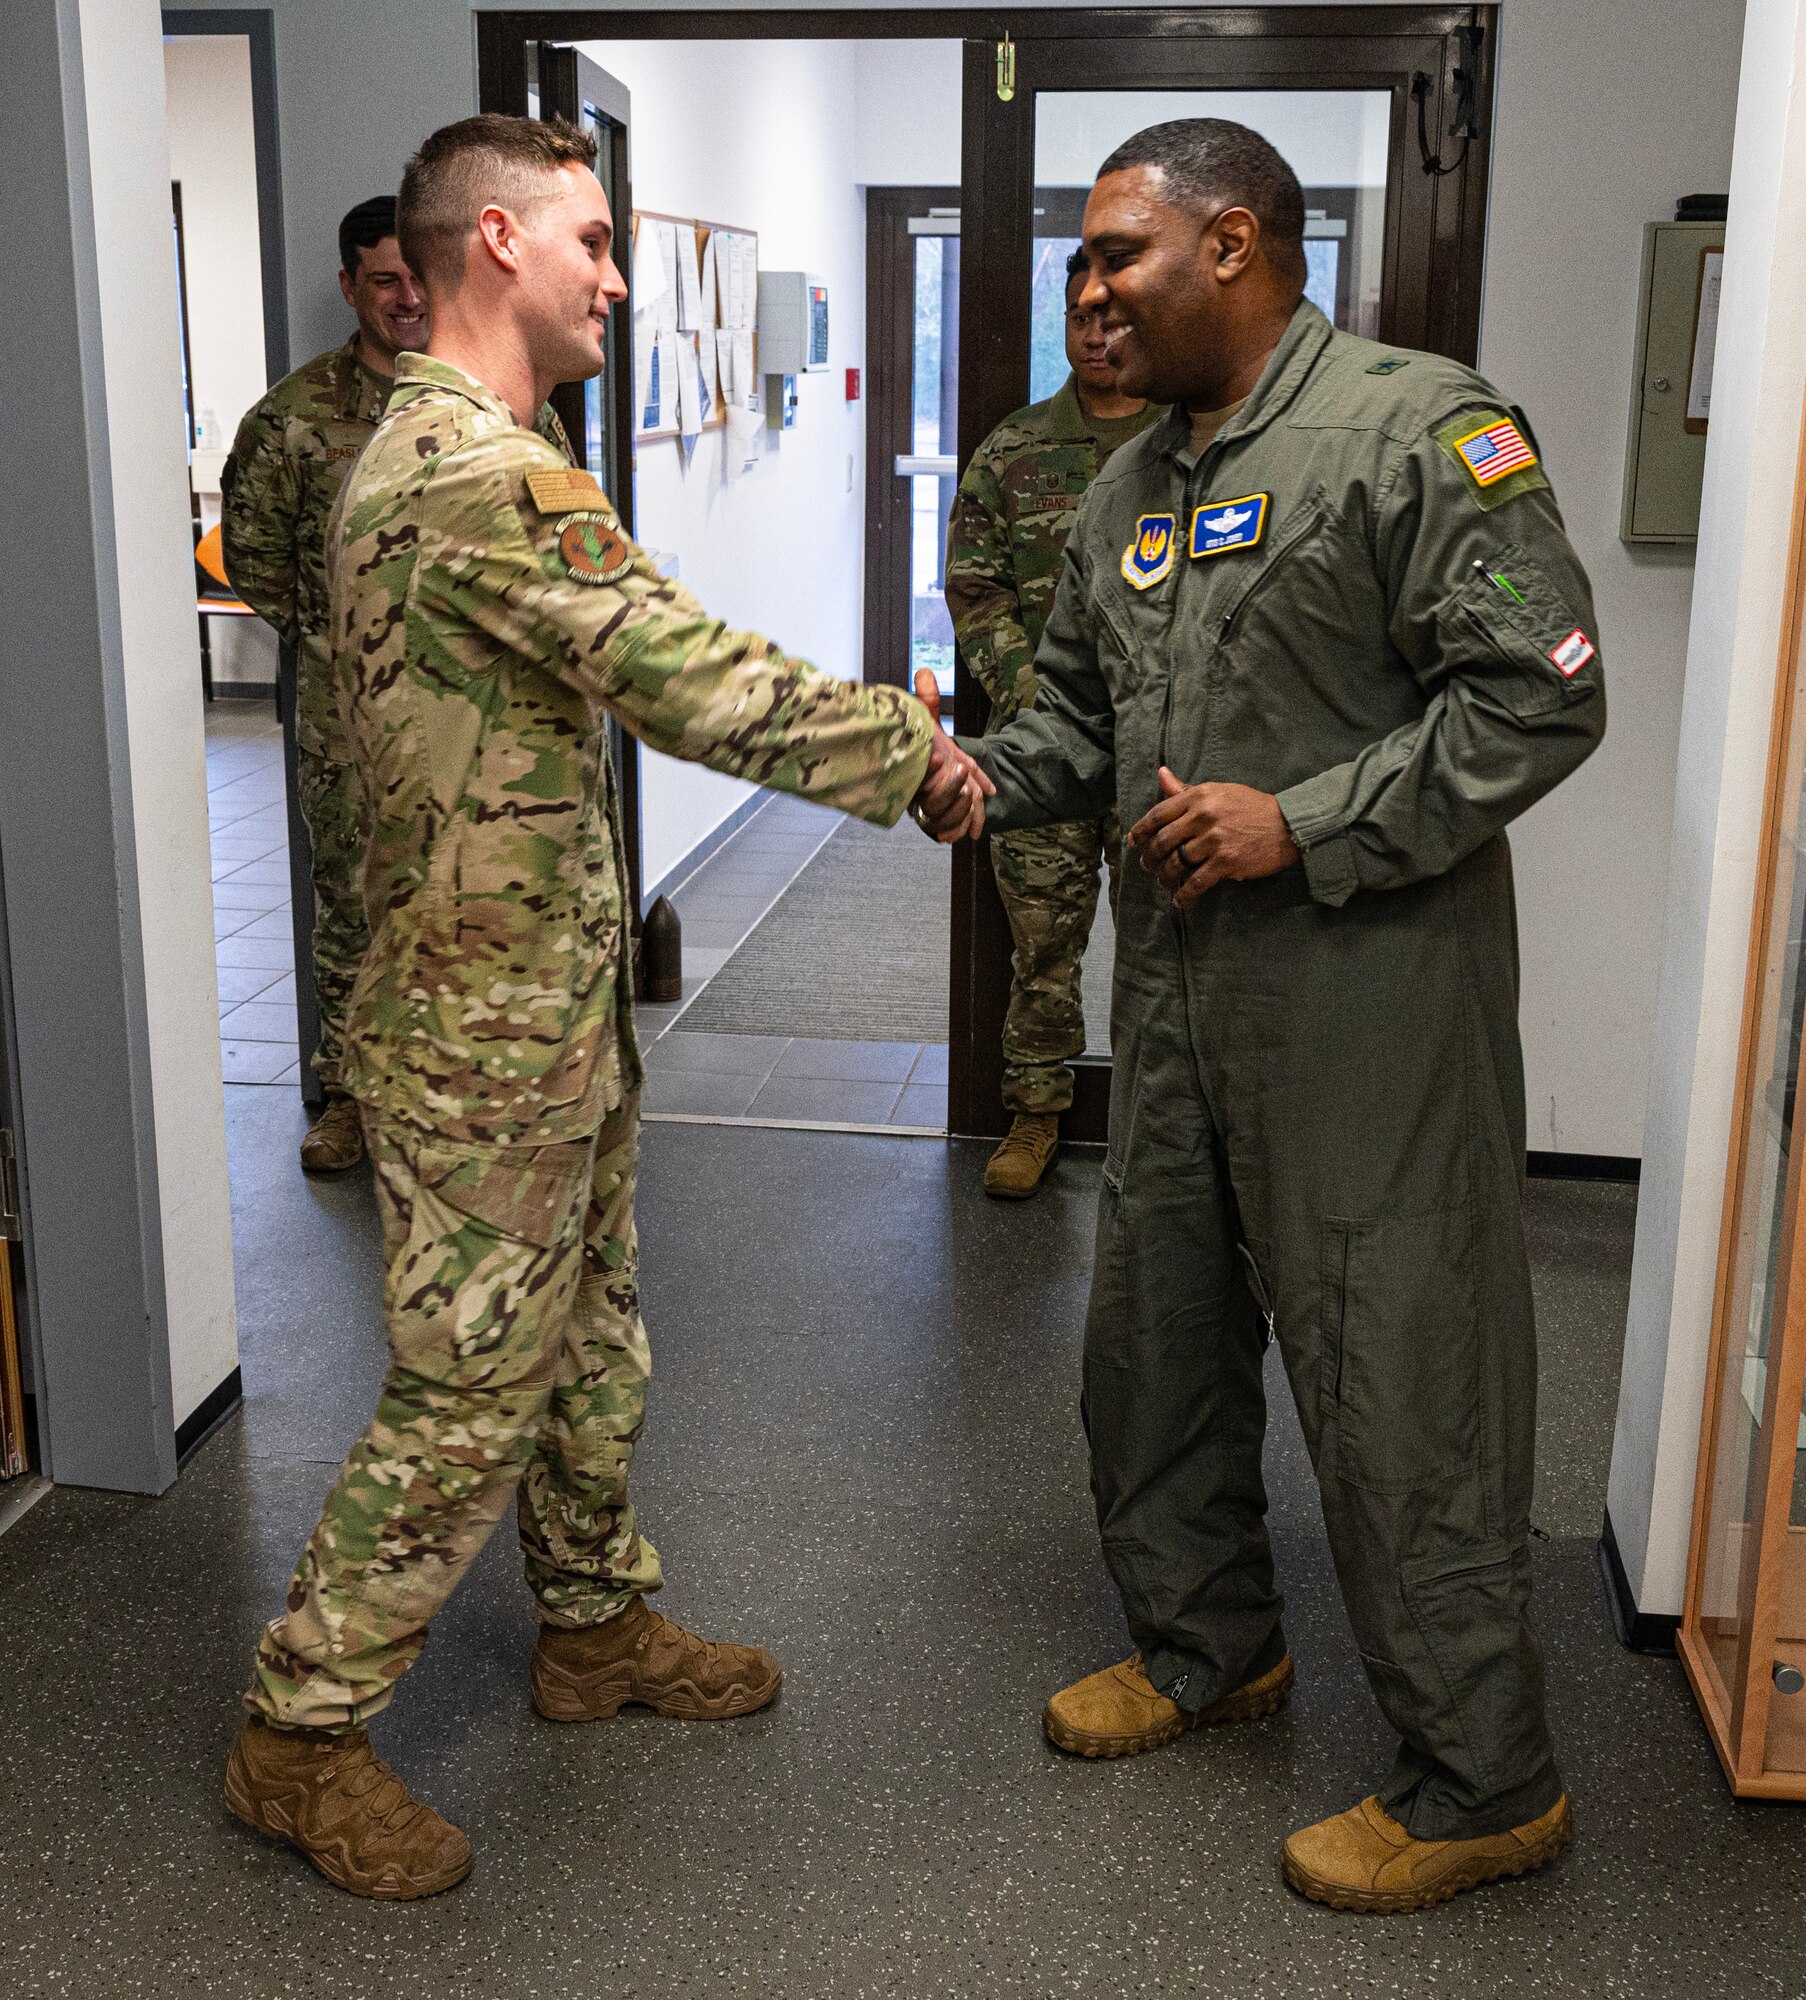 U.S. Air Force Airman 1st Class Kelsey Ockman, 786th Civil Engineer Squadron Explosive Ordnance Disposal apprentice, receives a coin from 86th Brig. Gen. Otis C. Jones Airlift Wing commander, at Ramstein Air Base, Germany, Jan. 30, 2024. Ockman earned the title of Airlifter of the Week for his hard work and dedication to the 86th AW mission and his EOD teammates. (U.S. Air Force photo by Senior Airman Thomas Karol)